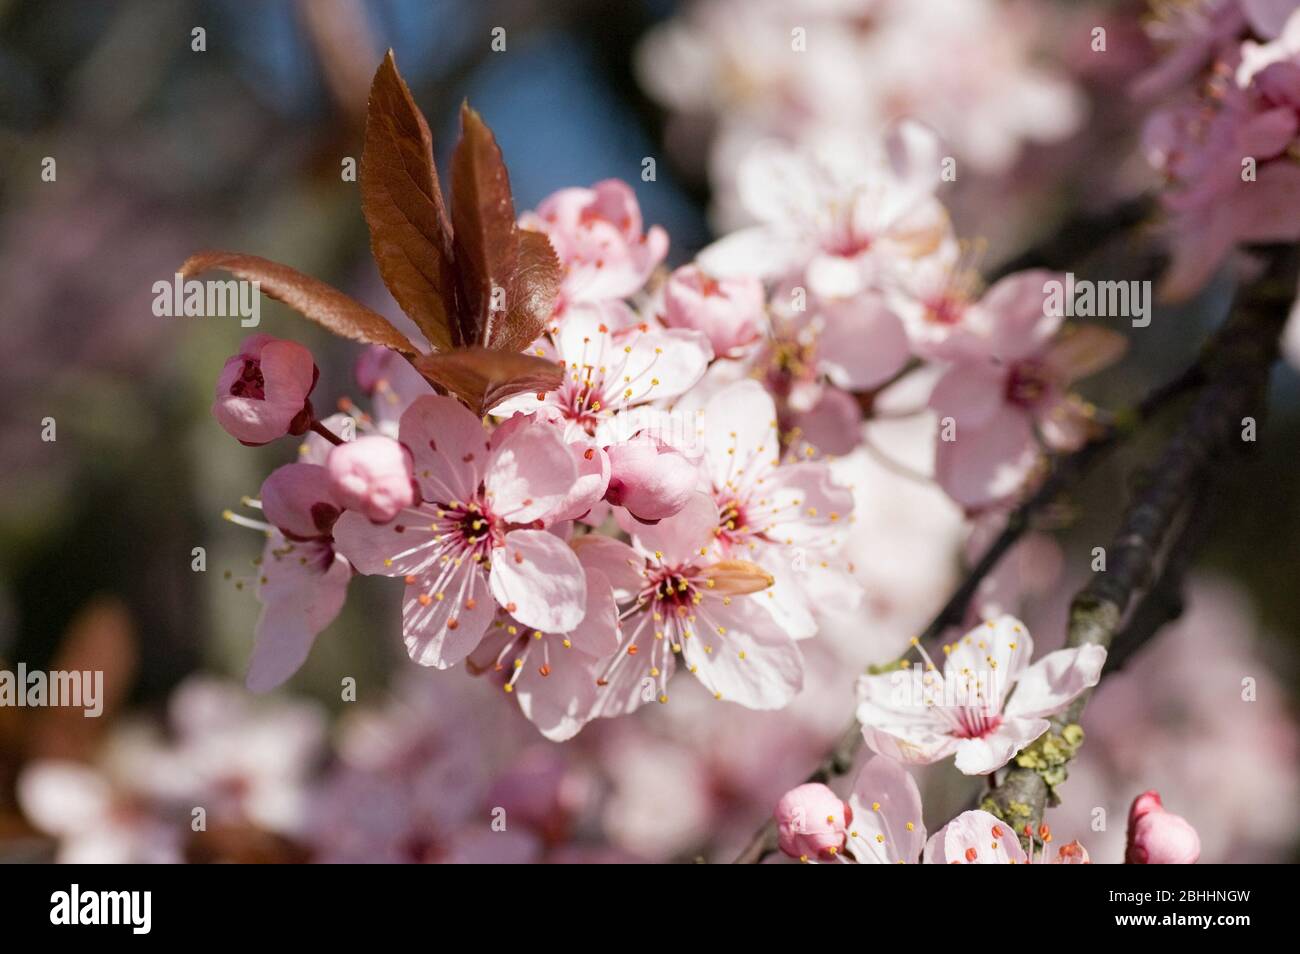 Closs-up image of the blossom on a Prunus serrulata, flowering cherry tree. Spring time. Stock Photo